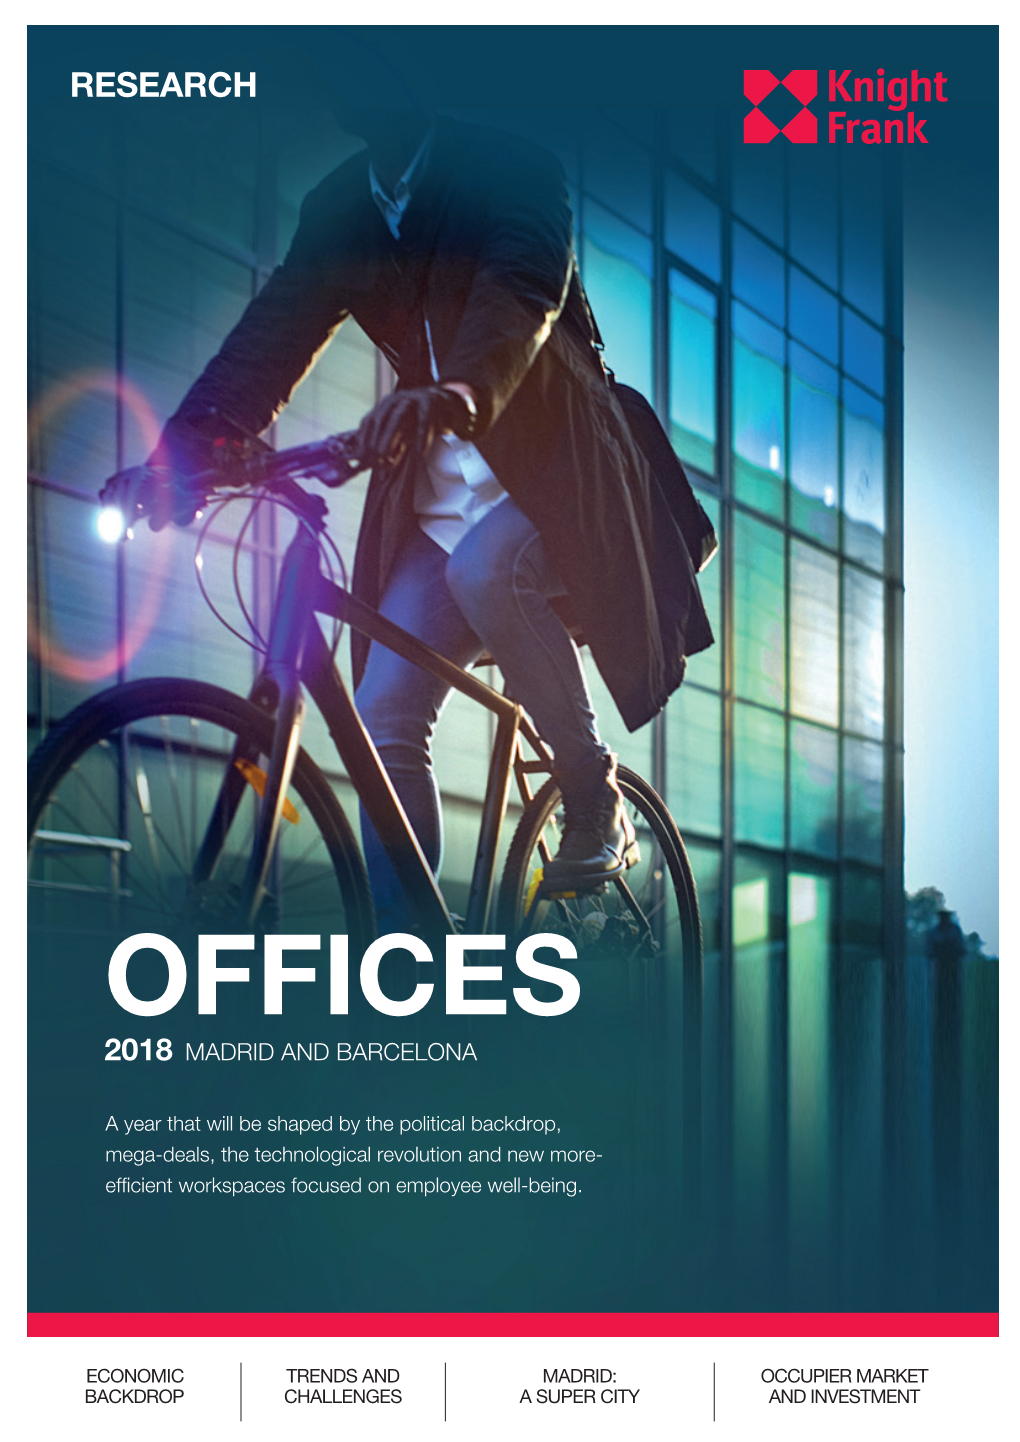 Offices 2018 Madrid and Barcelona